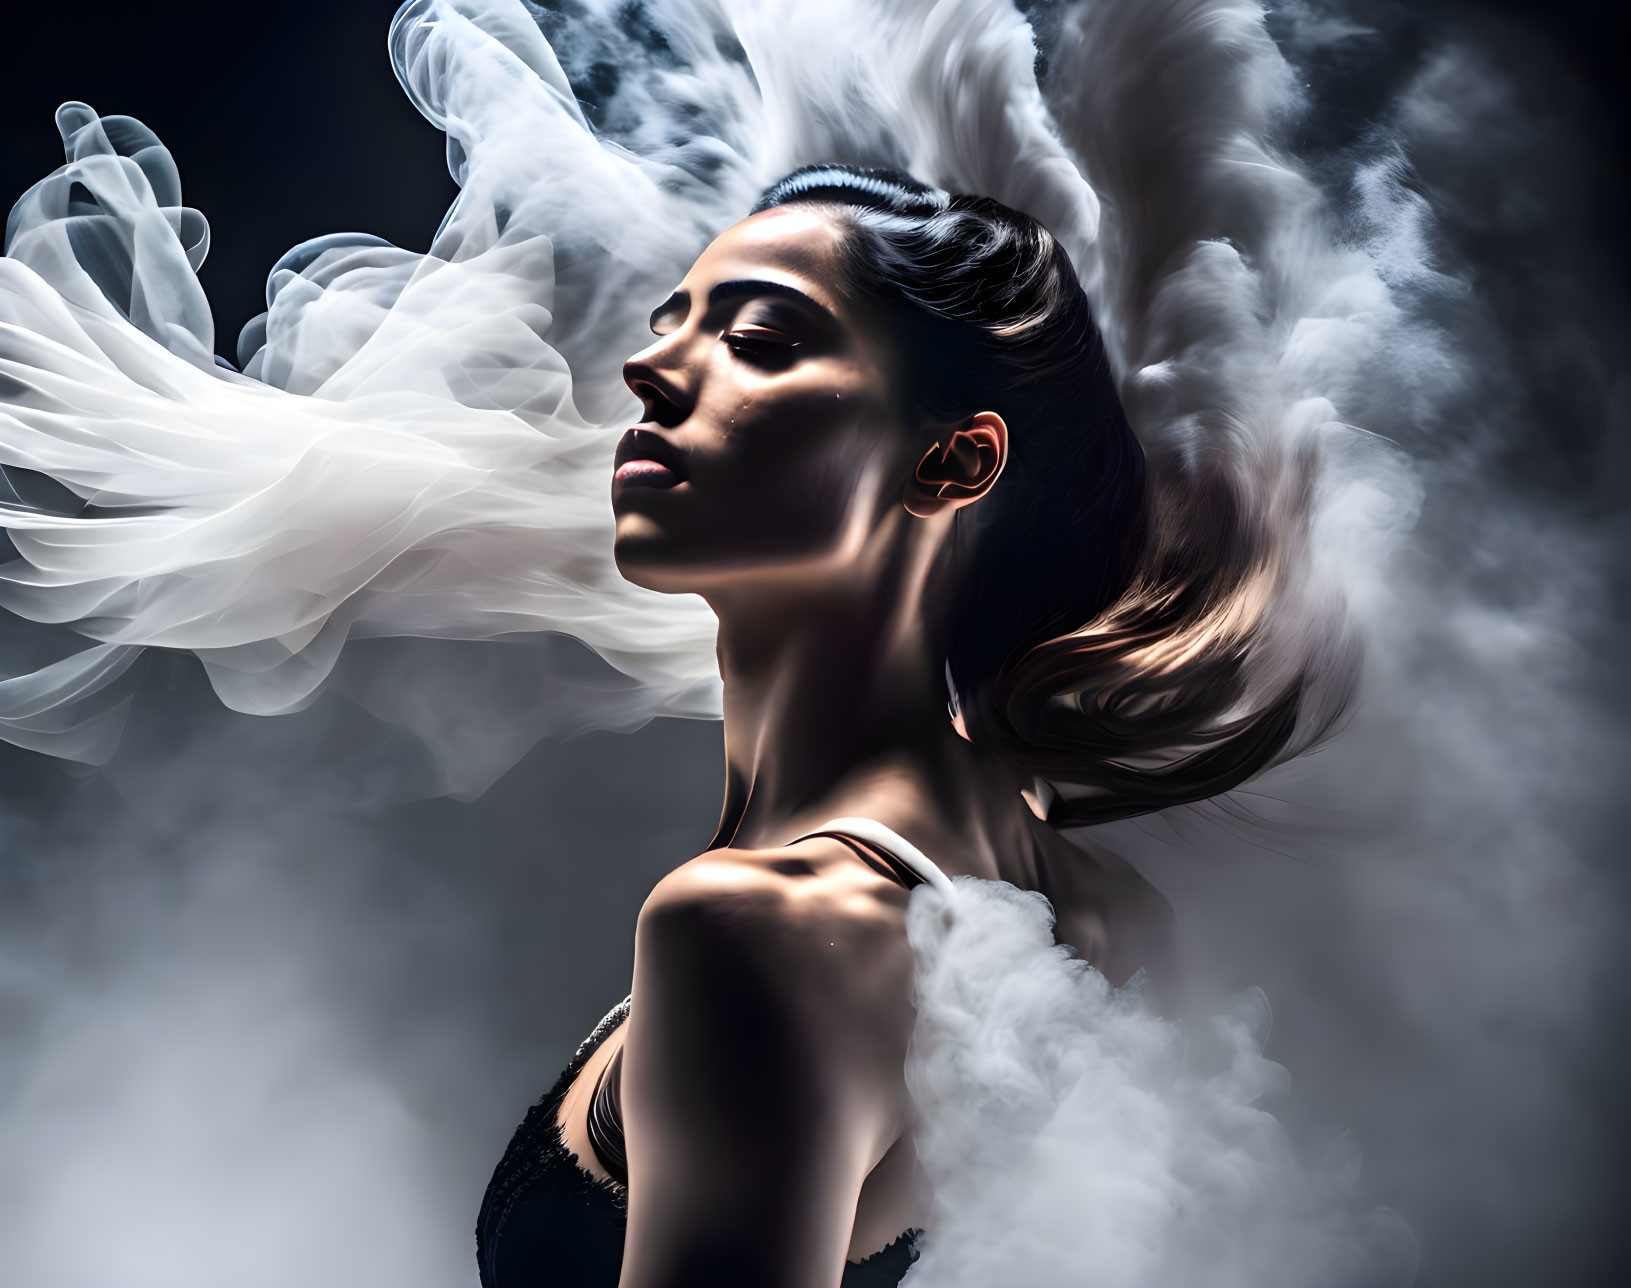 Profile of woman with swirling white smoke on dark background